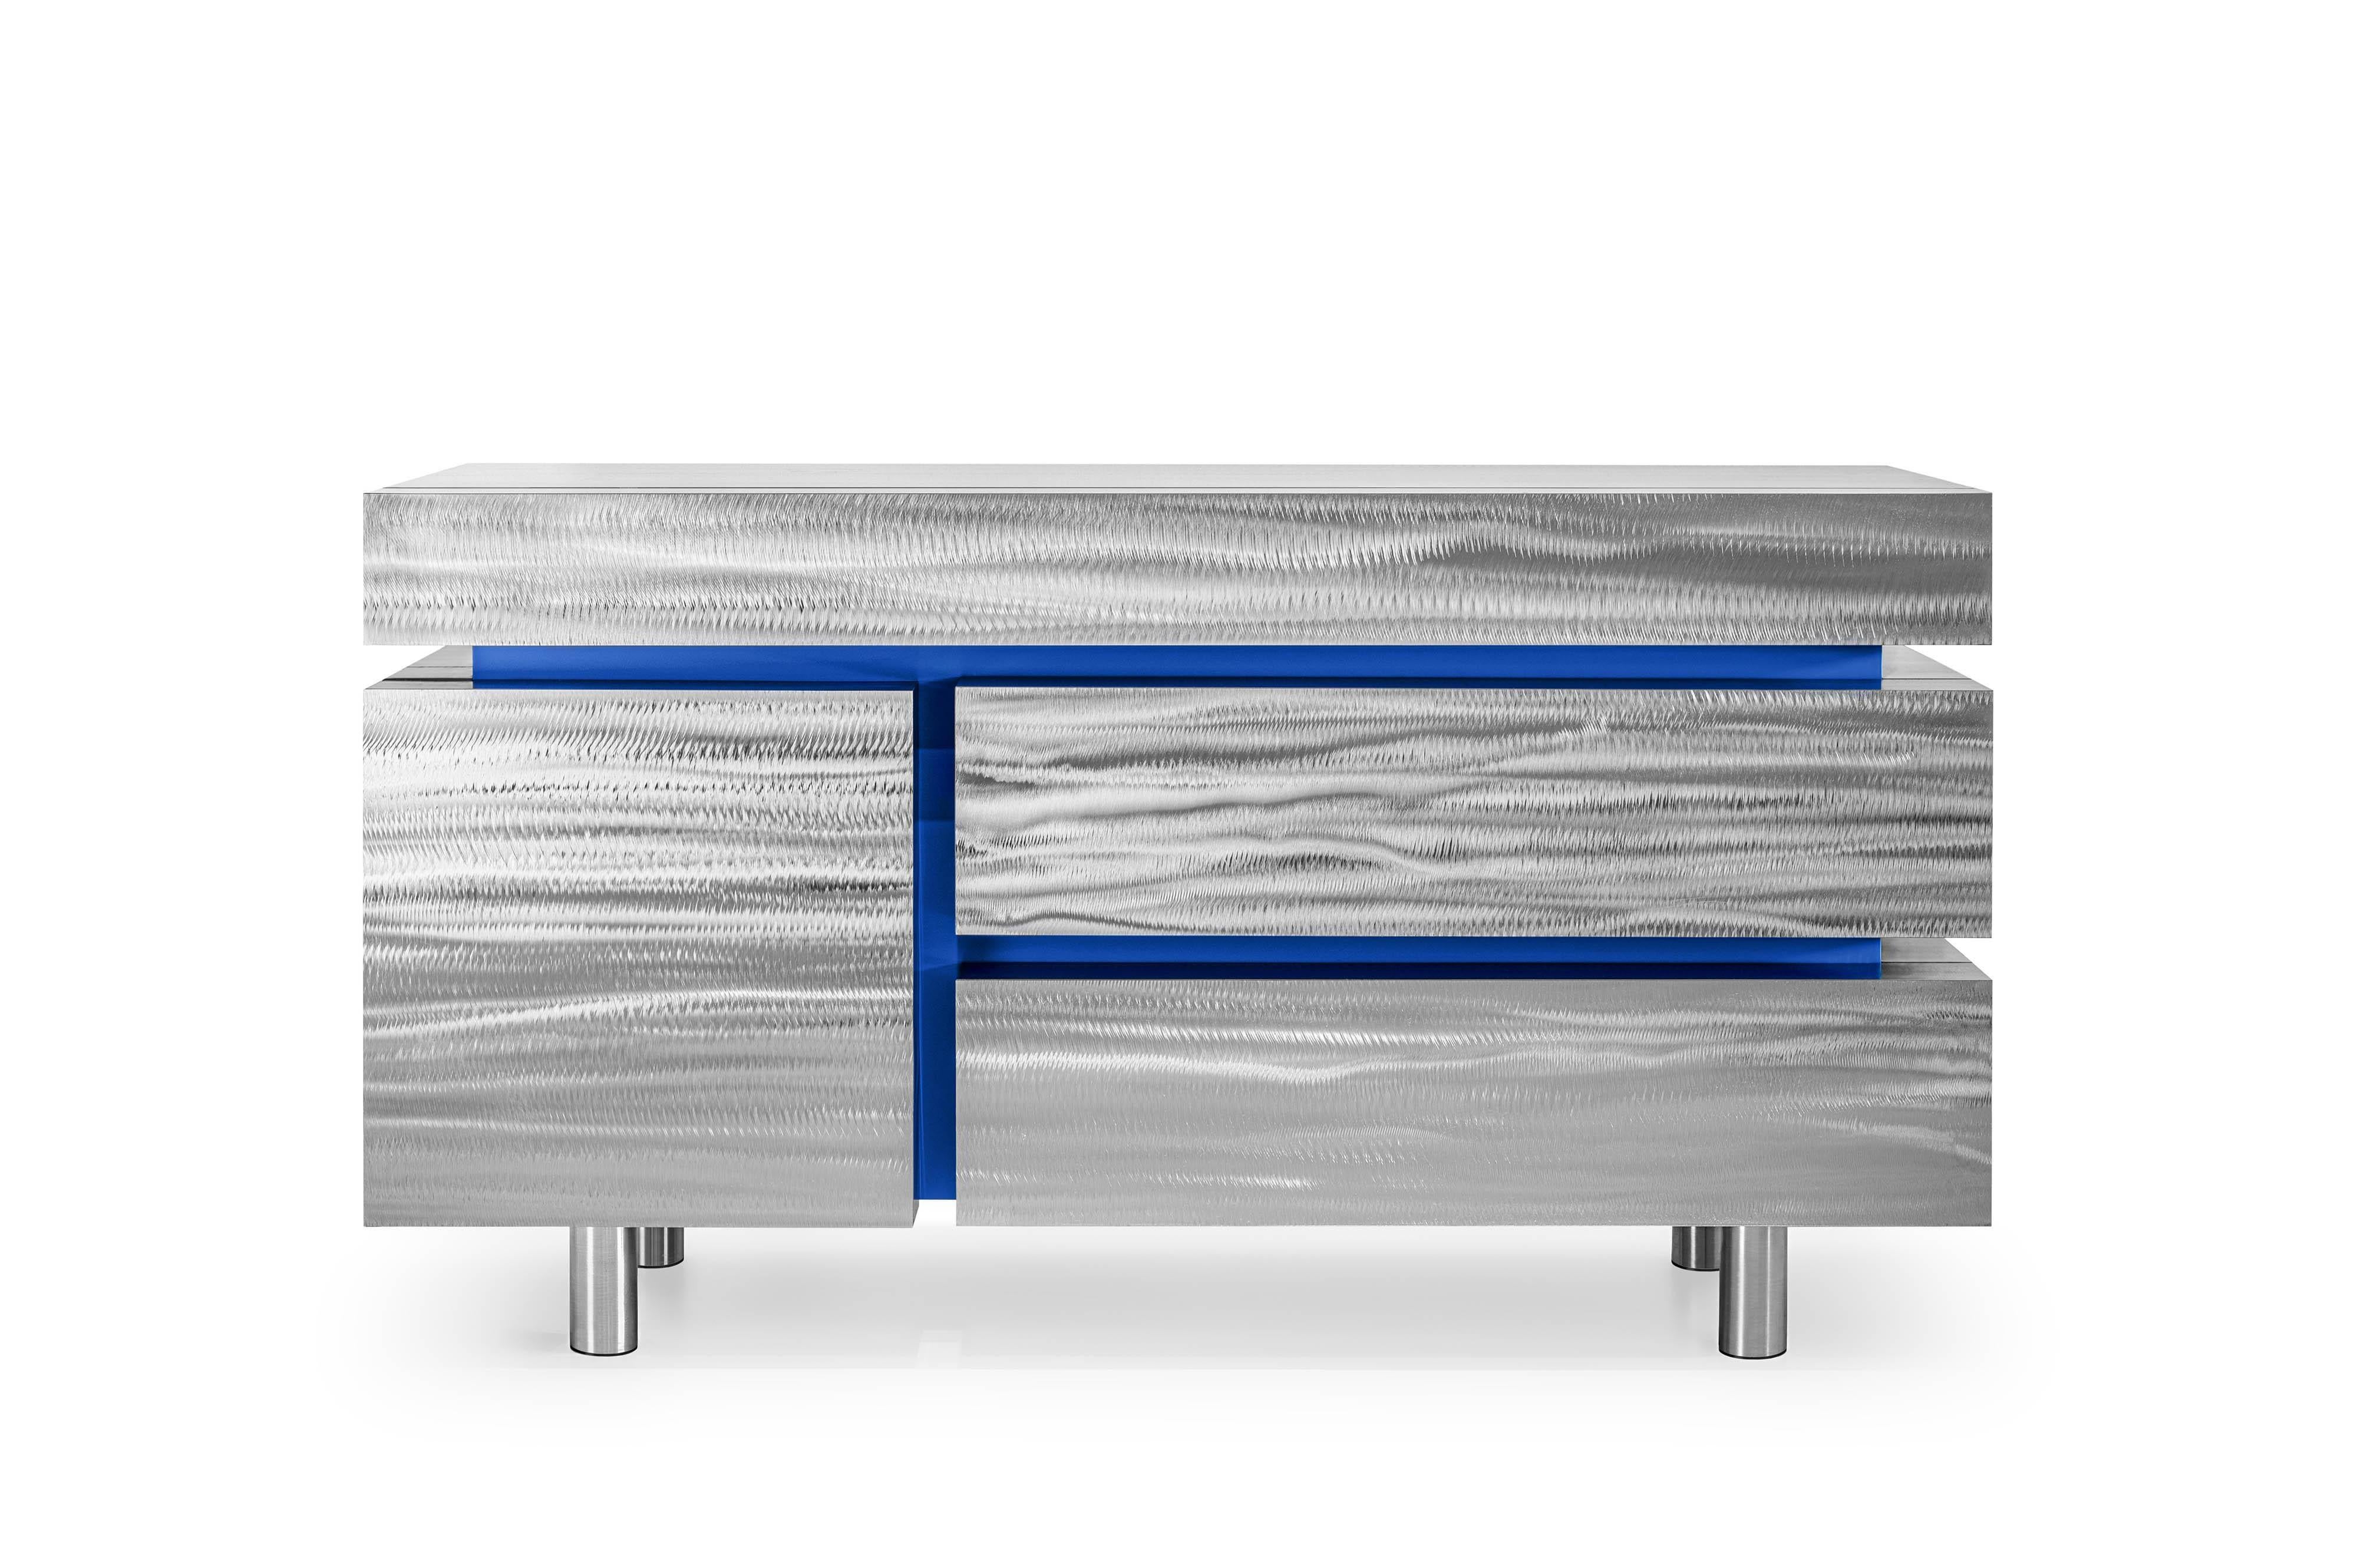 Sideboard Gerrit CSL by Noom
Materials: Hand brushed stainless steel, MDF
Dimensions: H 80 x W 140 x D 50 cm.

The metal sideboard has four drawers and is contemporary, massive, and elegant at the same time. This is a kind of understanding of